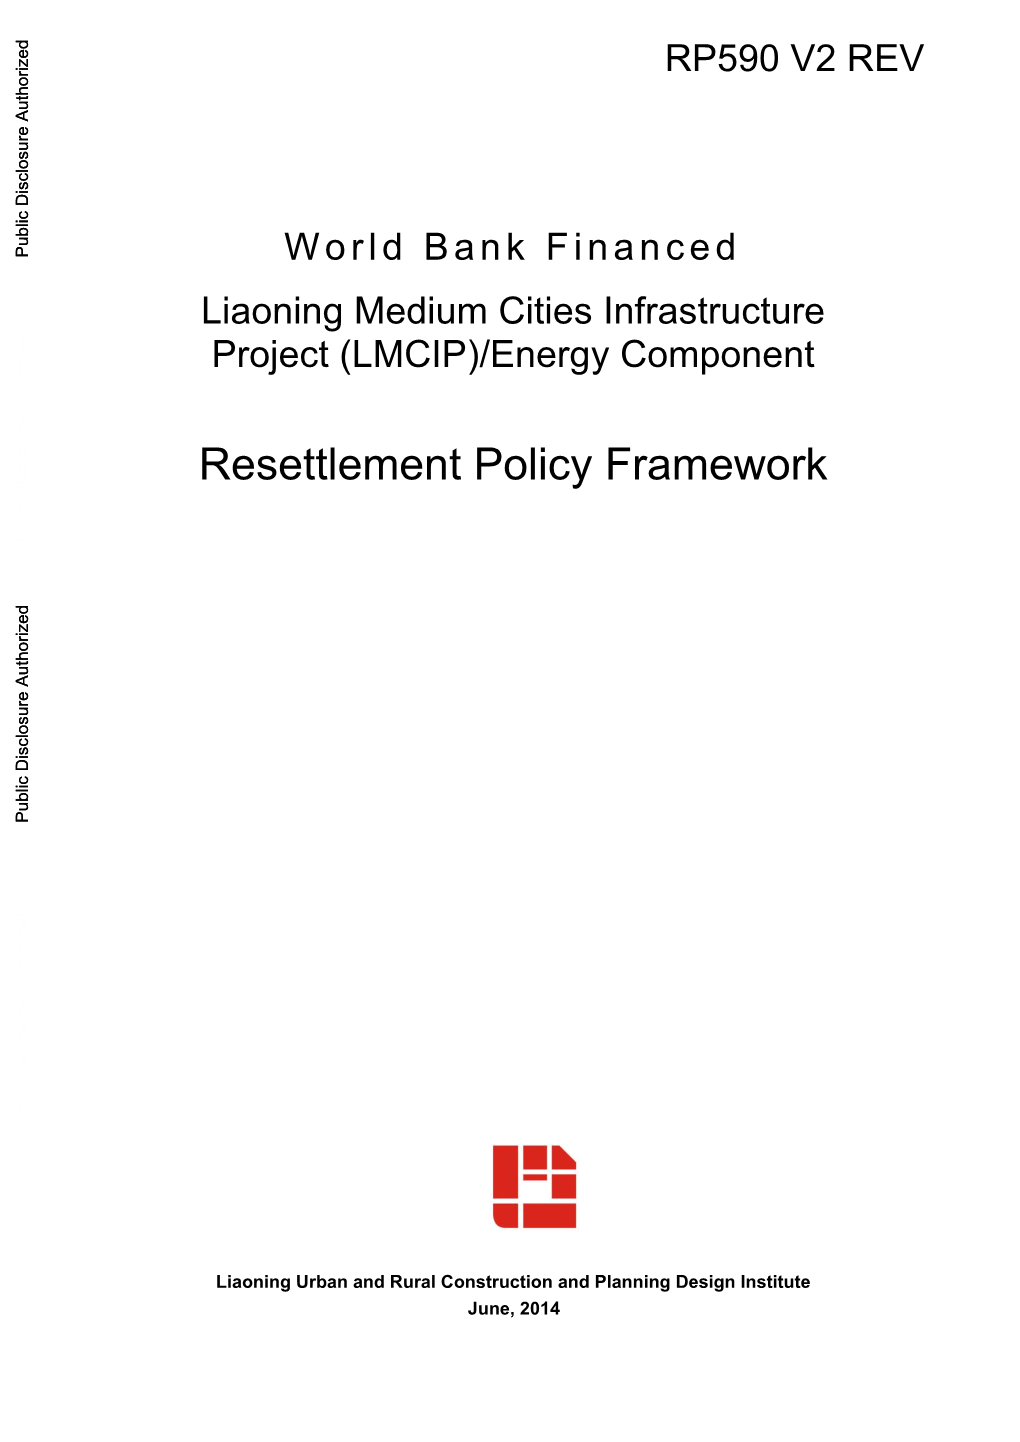 World Bank Financed Liaoning Medium Cities Infrastructure Project (LMCIP)/Energy Component